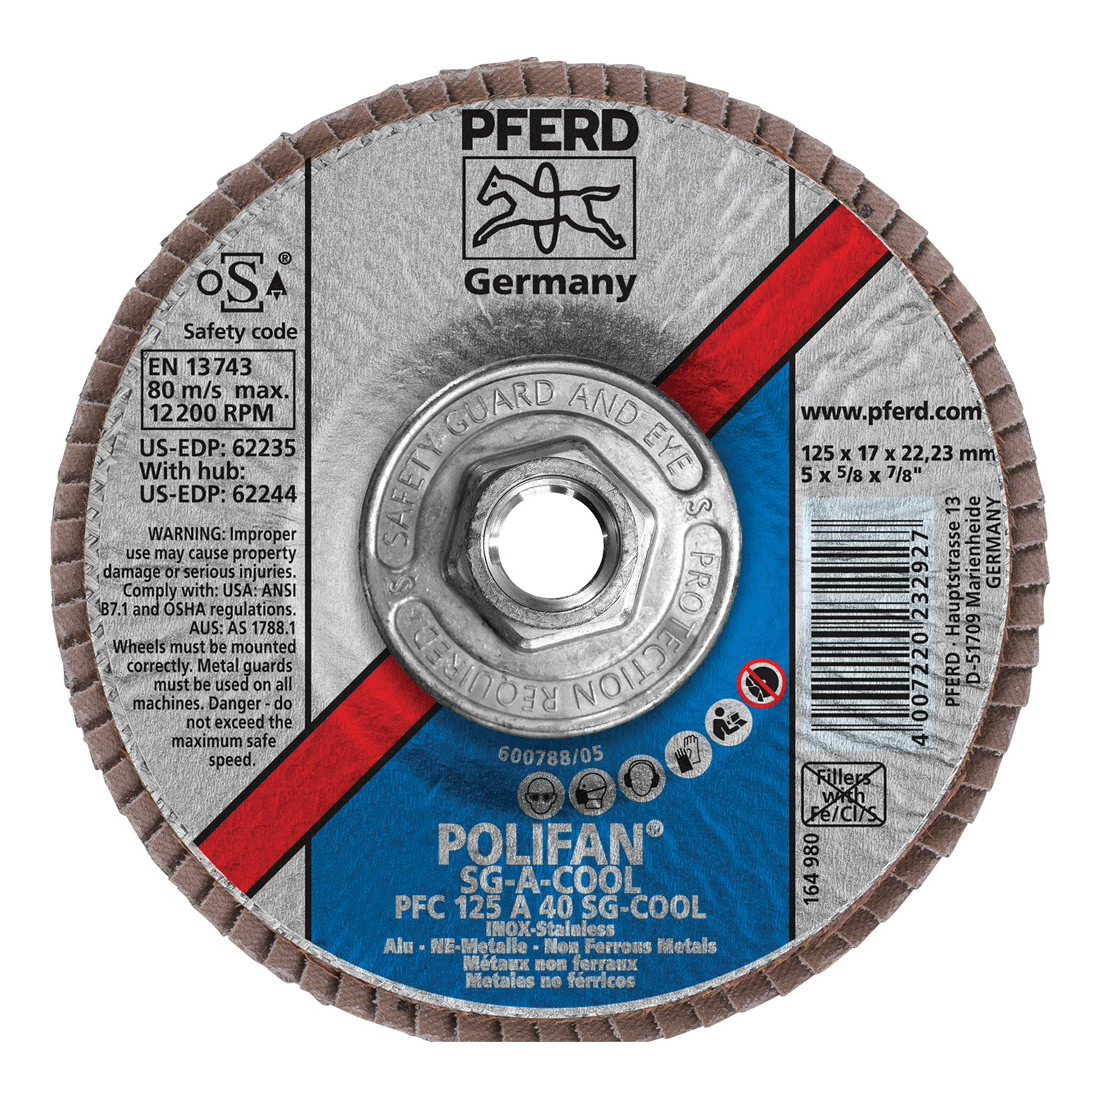 PFERD Polifan® 62244 Performance Line SG A-COOL Threaded Coated Abrasive Flap Disc, 5 in Dia, 40 Grit, Aluminum Oxide Abrasive, Type 29 Conical Disc